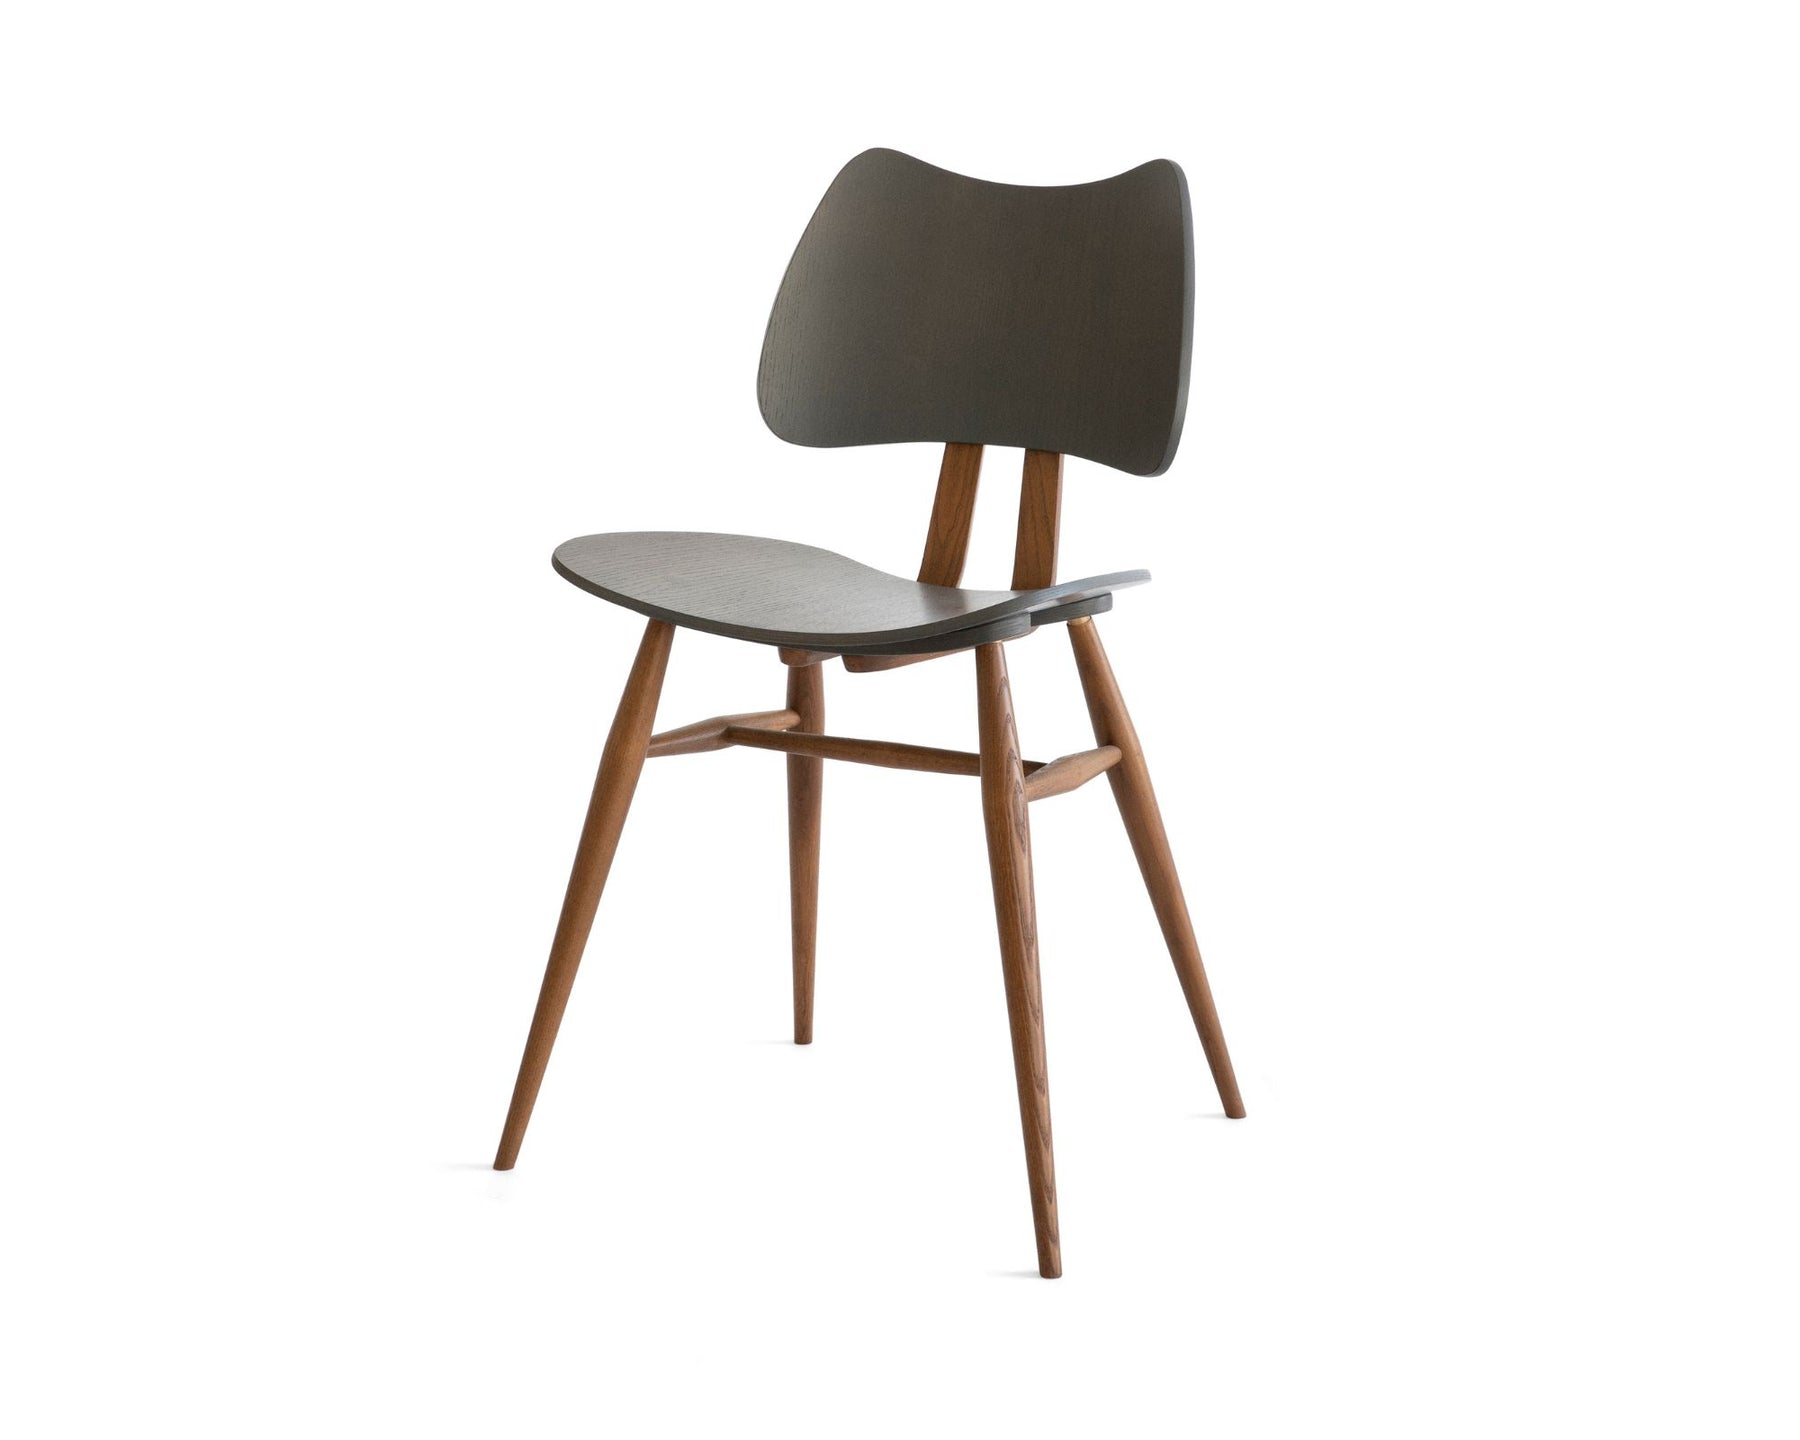 L. Ercolani Butterfly Dining Chair | DSHOP